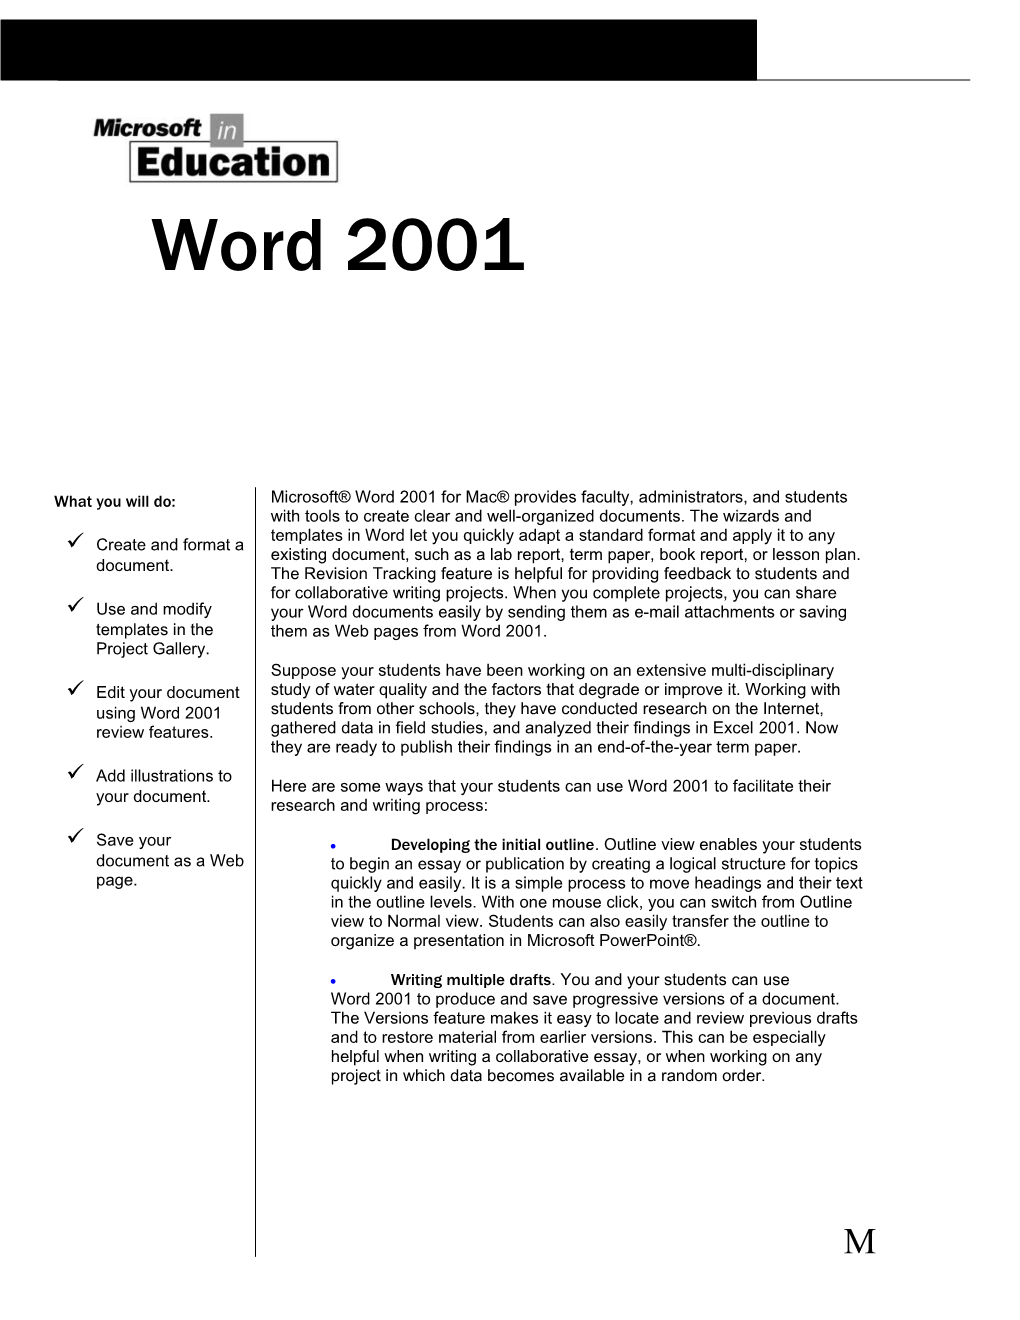 Microsoft Word2001 for Mac Provides Faculty, Administrators, and Students with Tools To